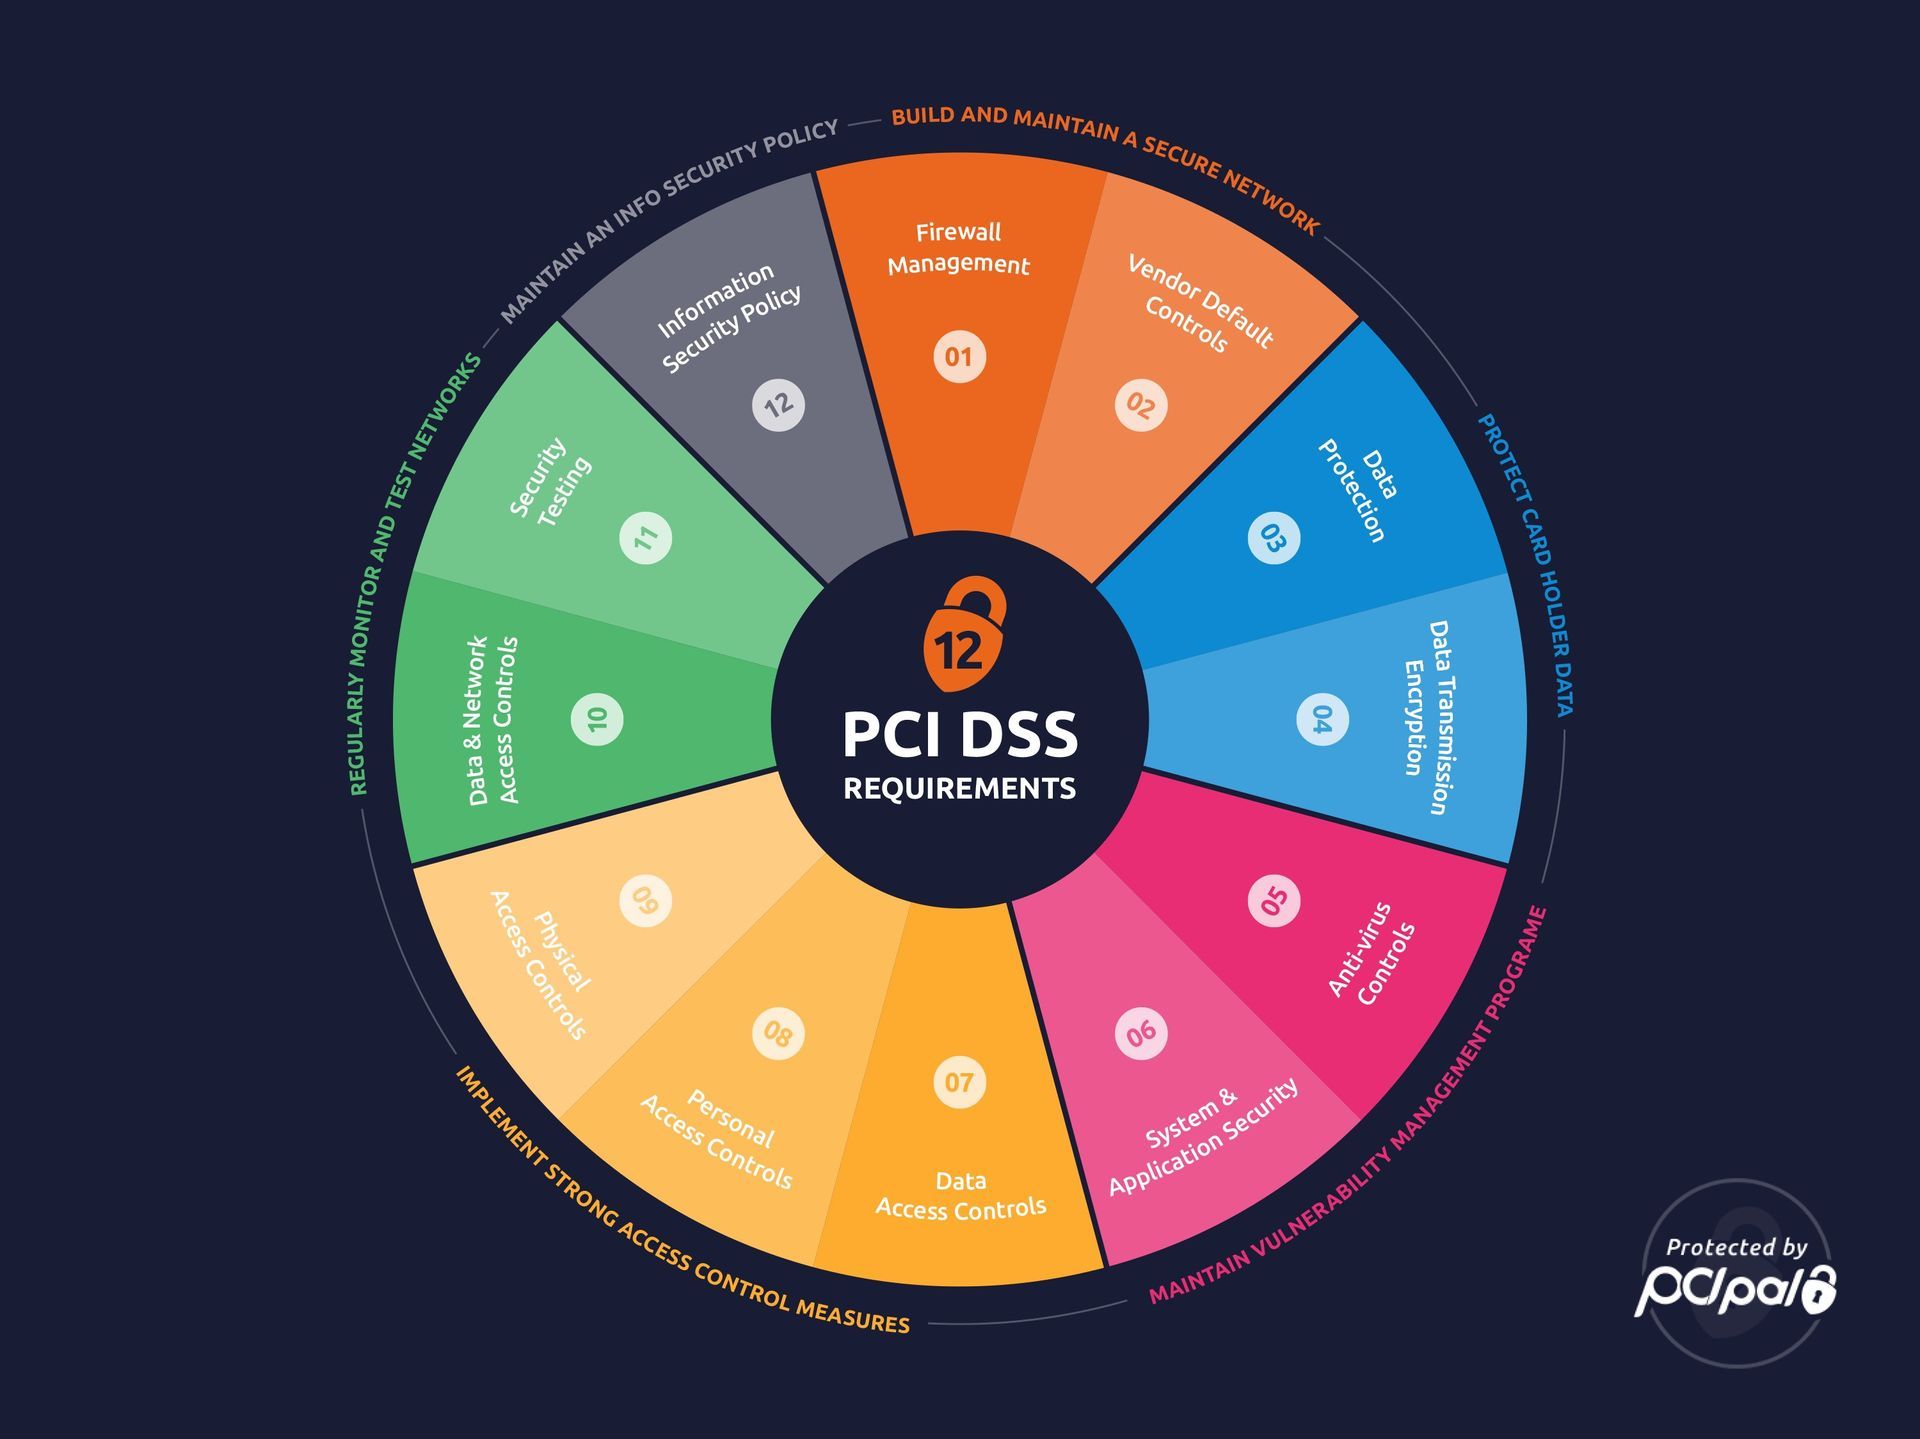 12 PCI DSS Requirements